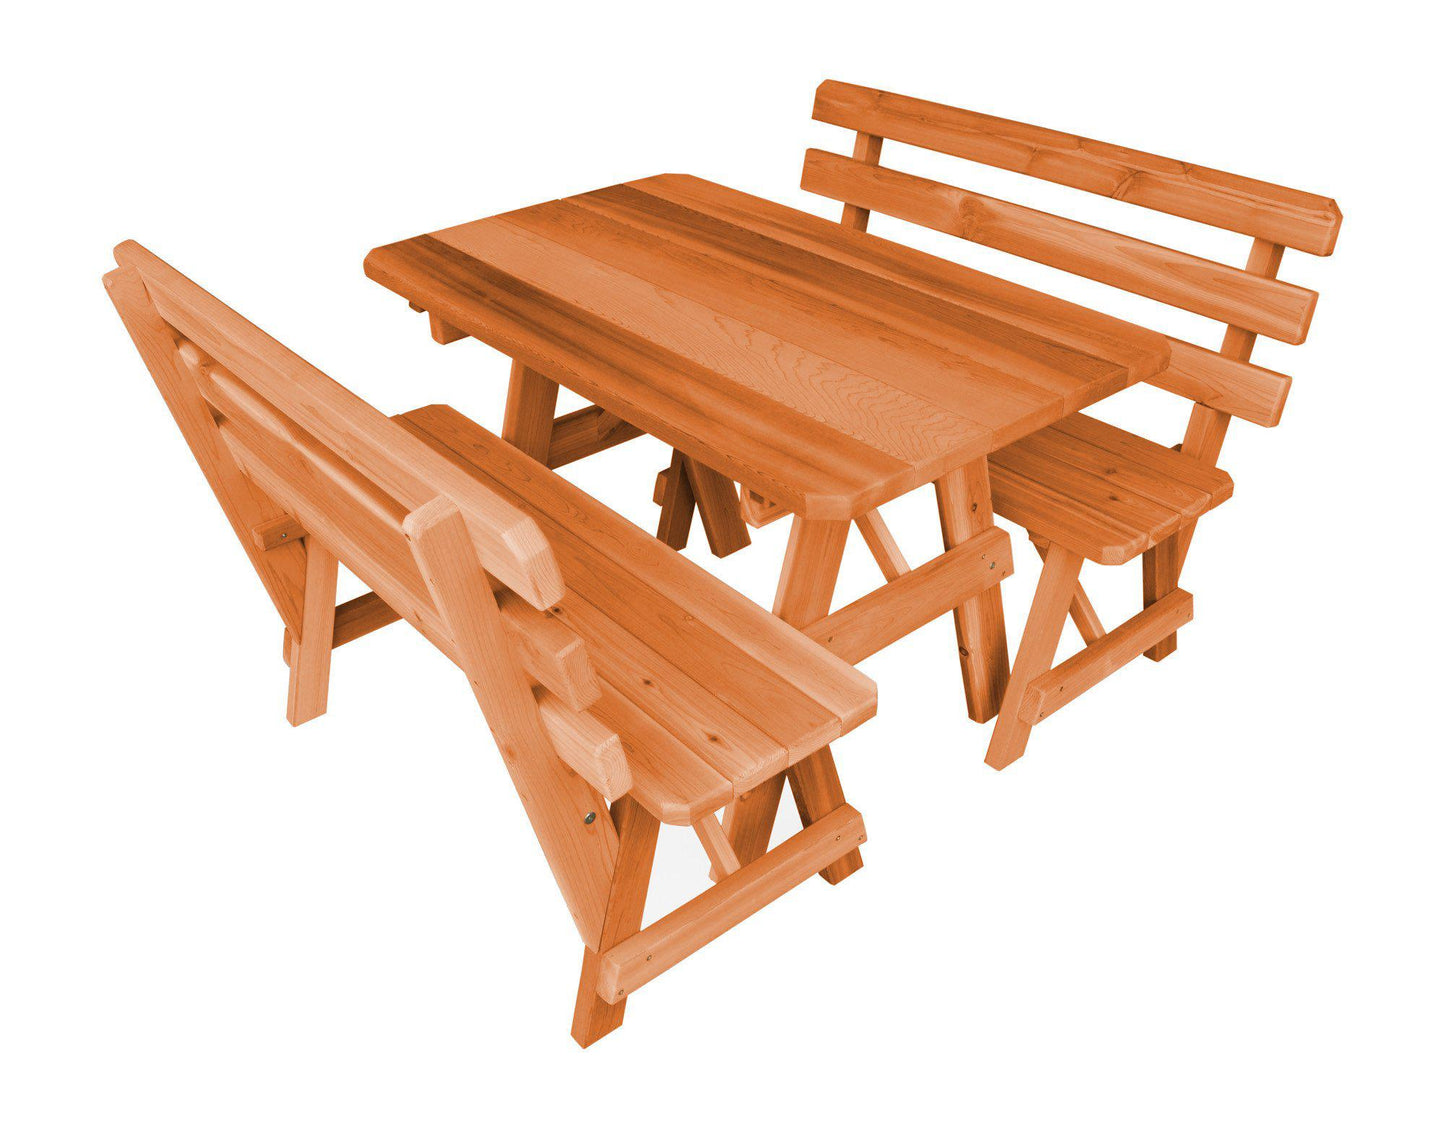 A&L FURNITURE CO. Western Red Cedar 94" Table w/2 Backed Benches - Specify for FREE 2" Umbrella Hole - LEAD TIME TO SHIP 4 WEEKS OR LESS